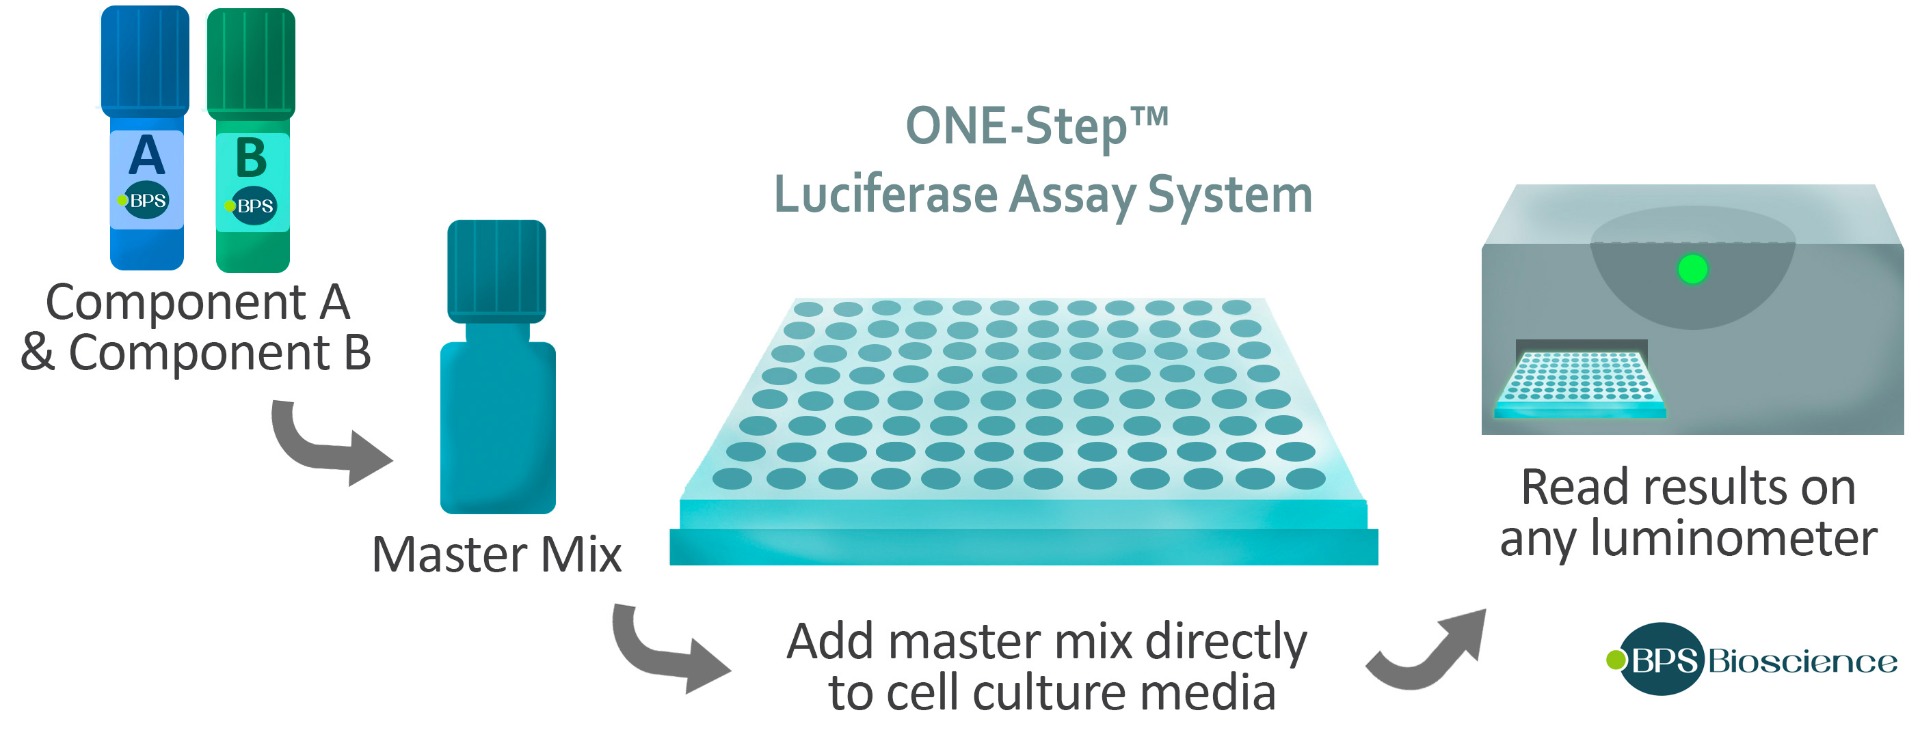 One-Step Luciferase Assay System